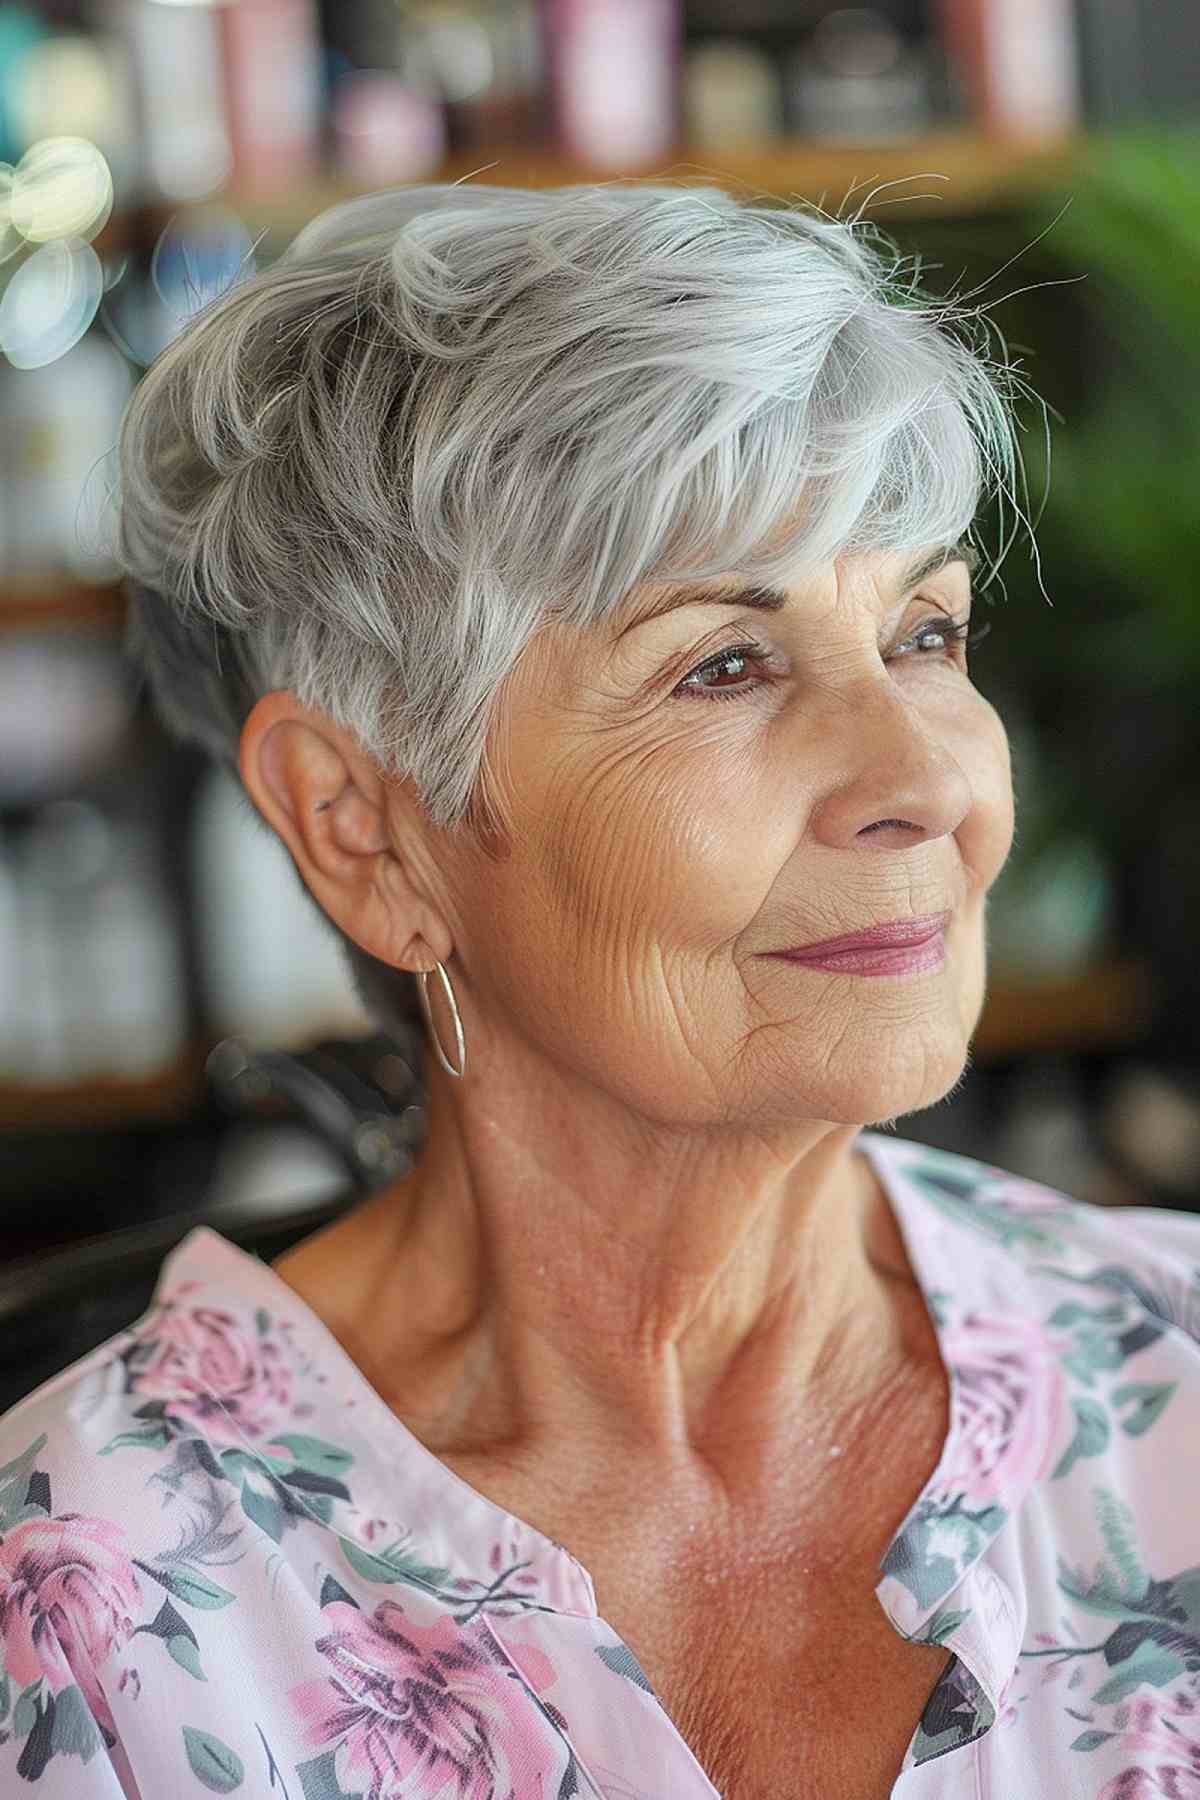 Elderly woman with a chic feathered pixie cut in natural silver, styled with soft layers to add volume and texture, complementing her mature features beautifully.